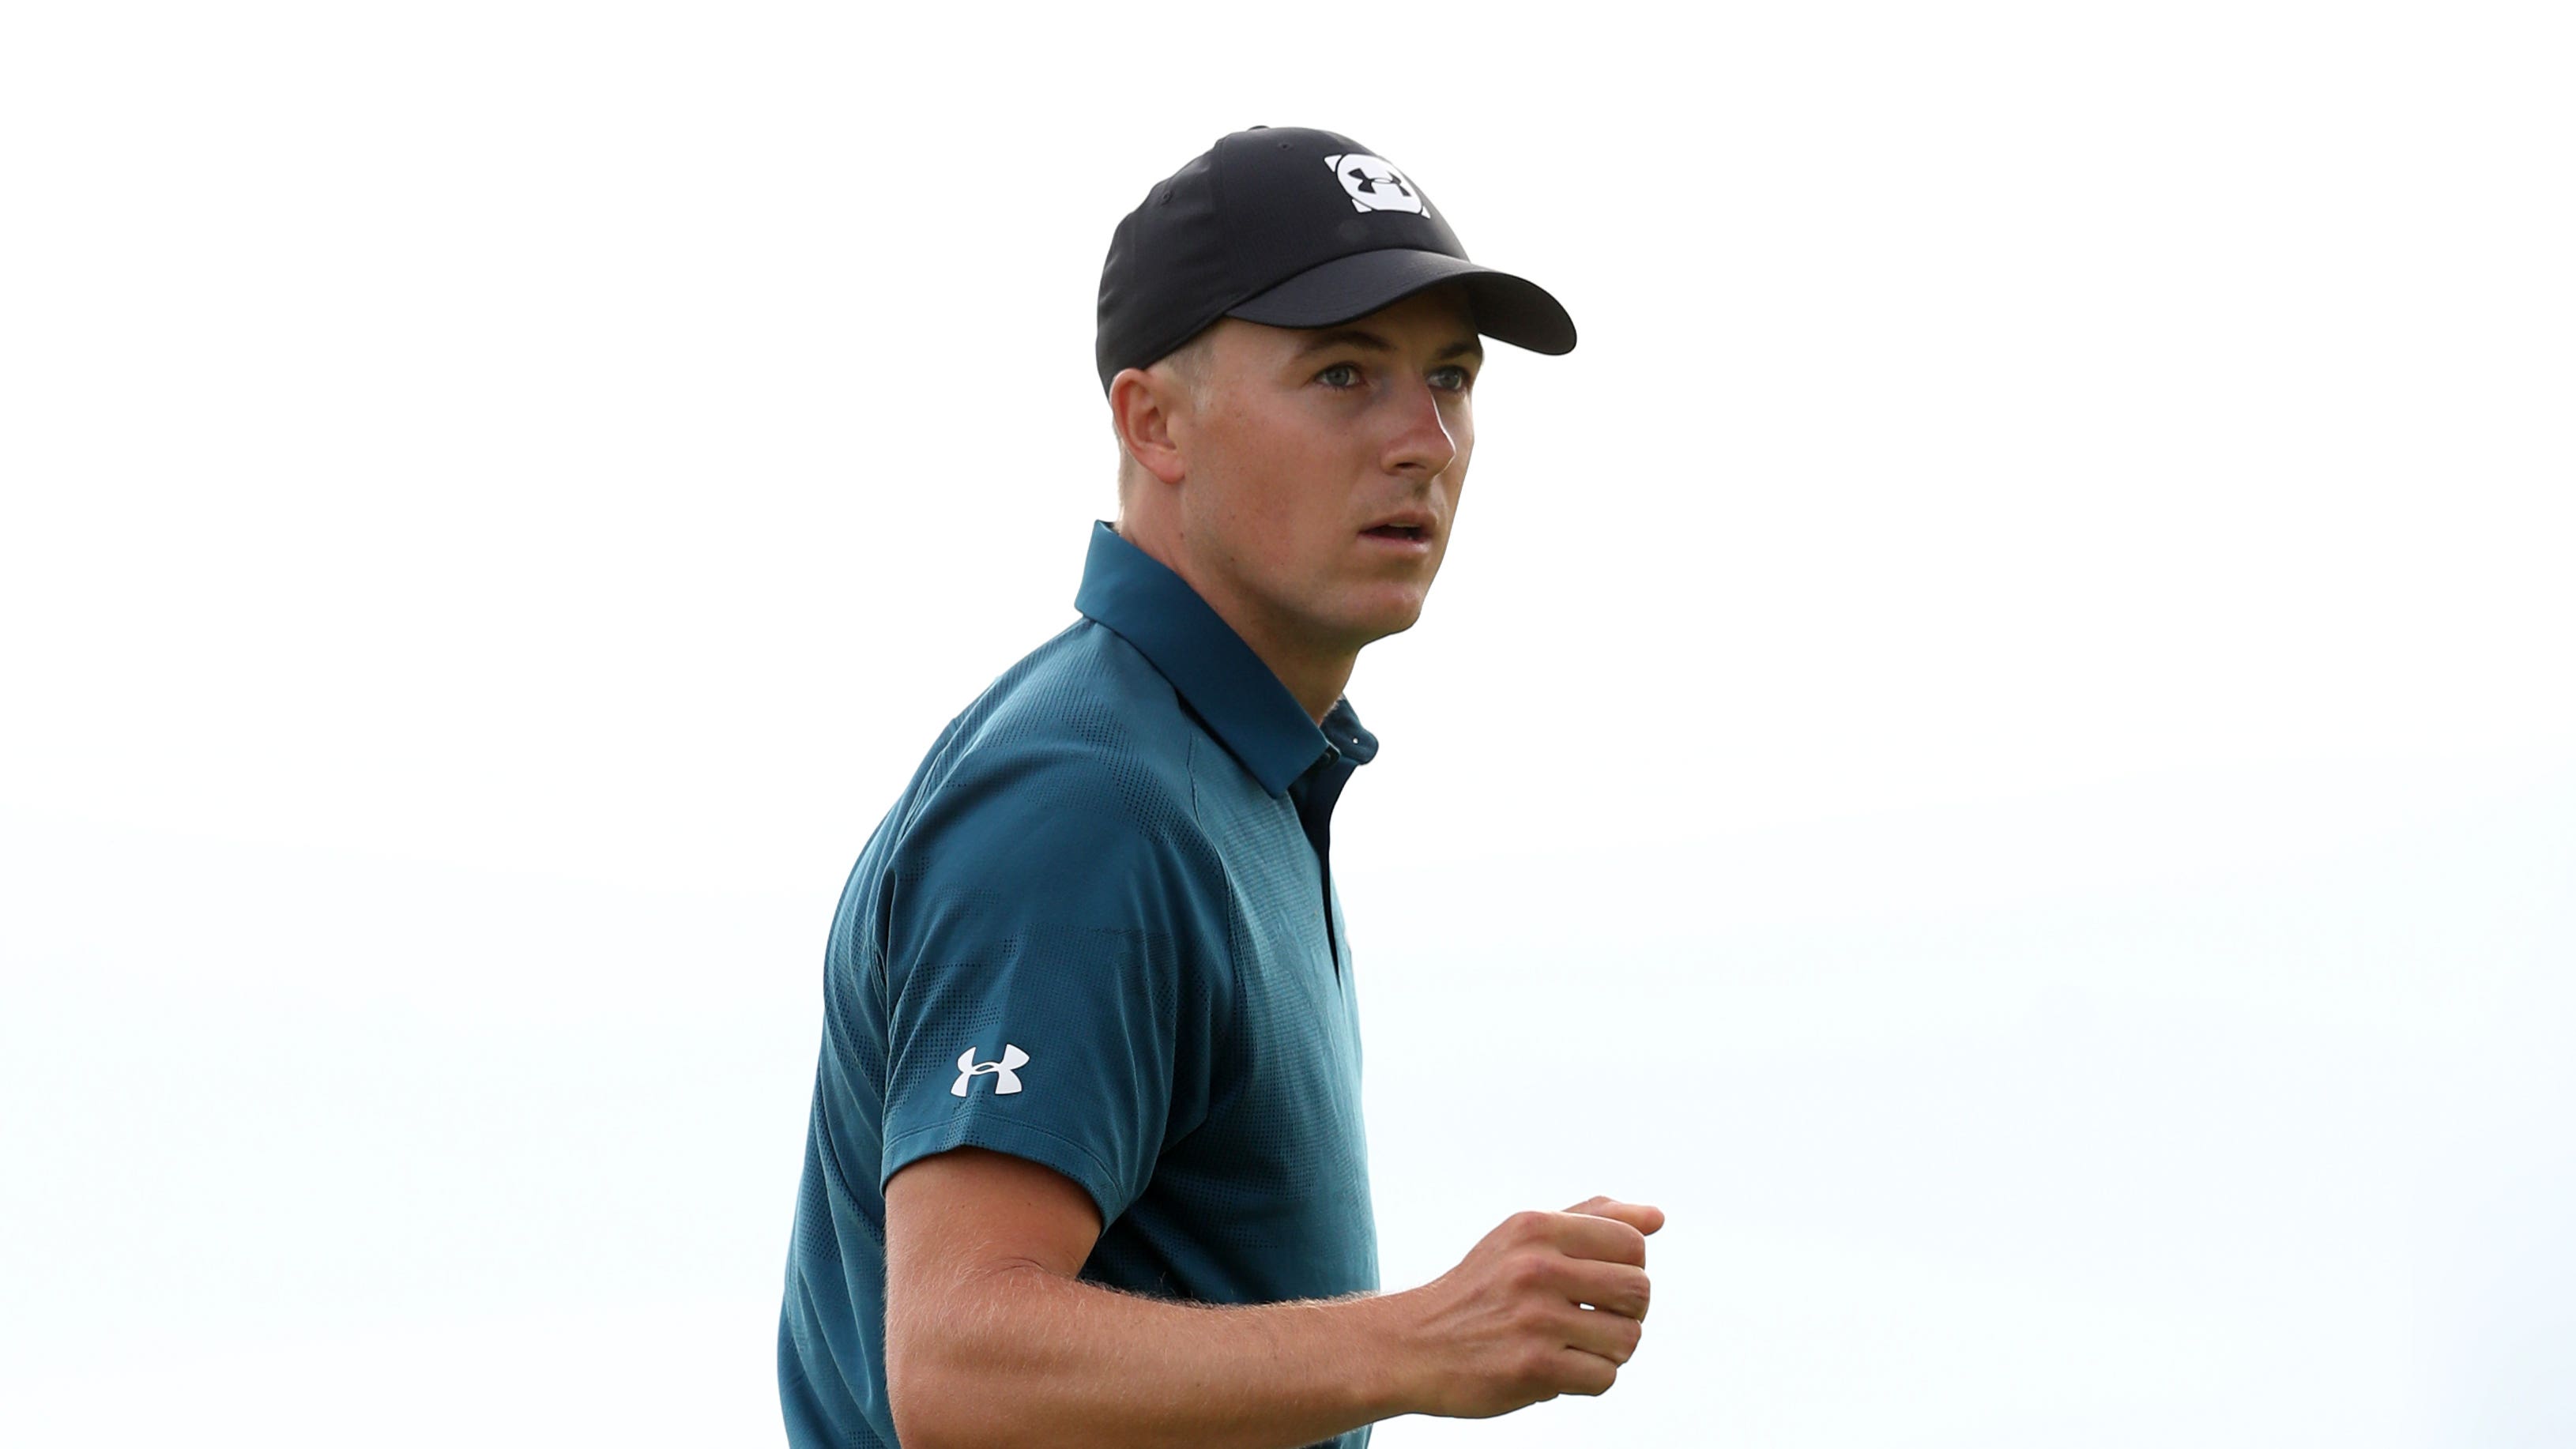 Jordan Spieth in on a good course to retain his trophy